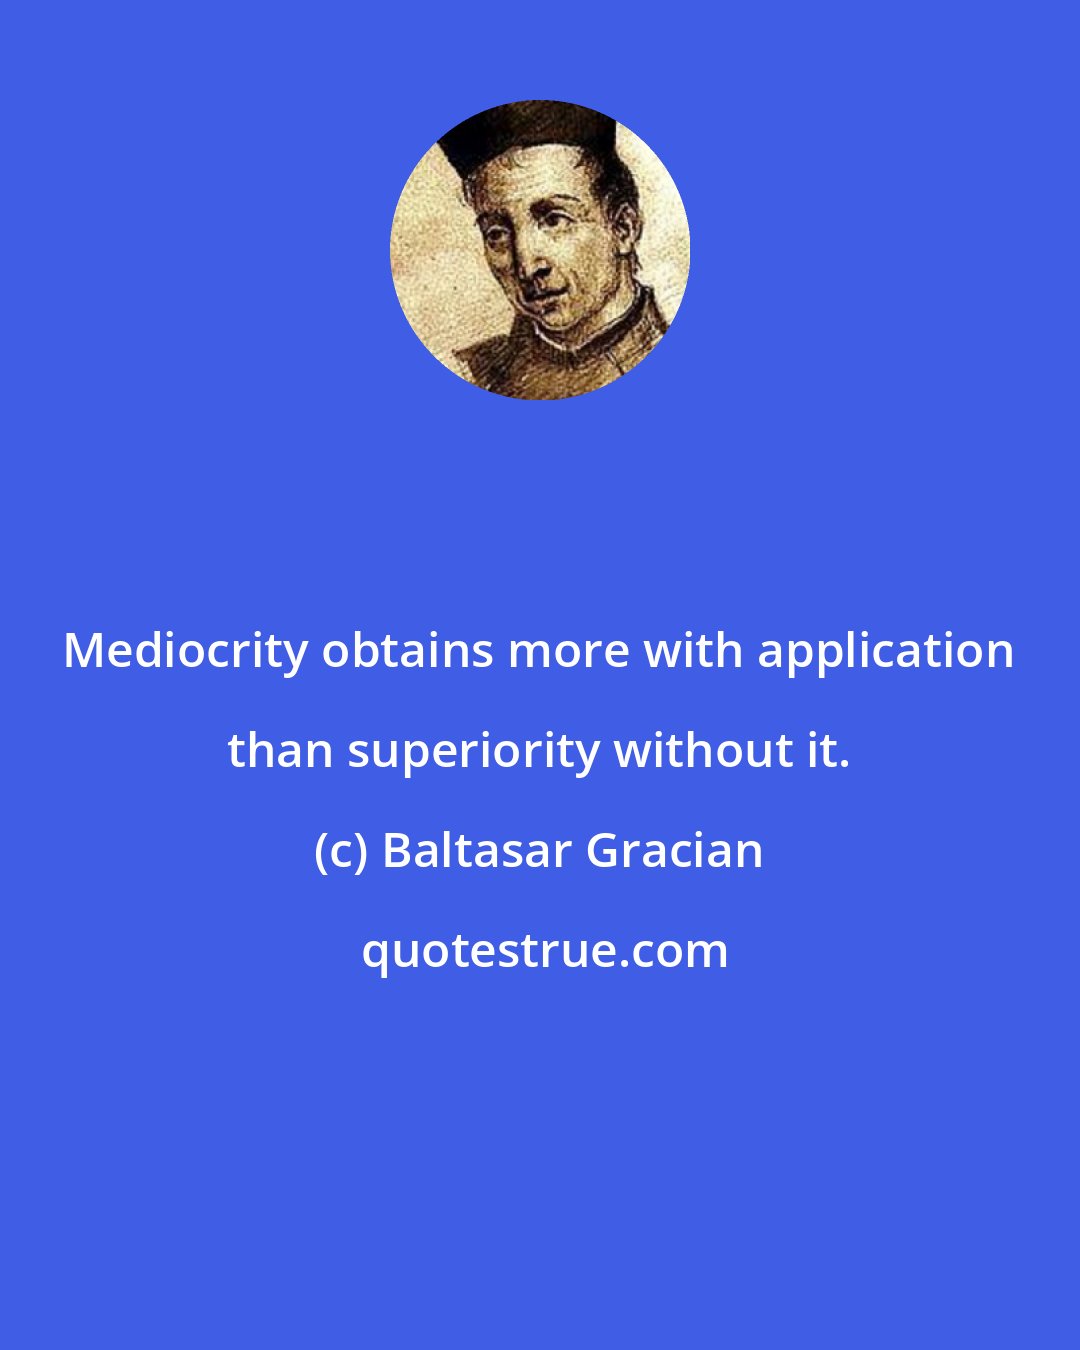 Baltasar Gracian: Mediocrity obtains more with application than superiority without it.